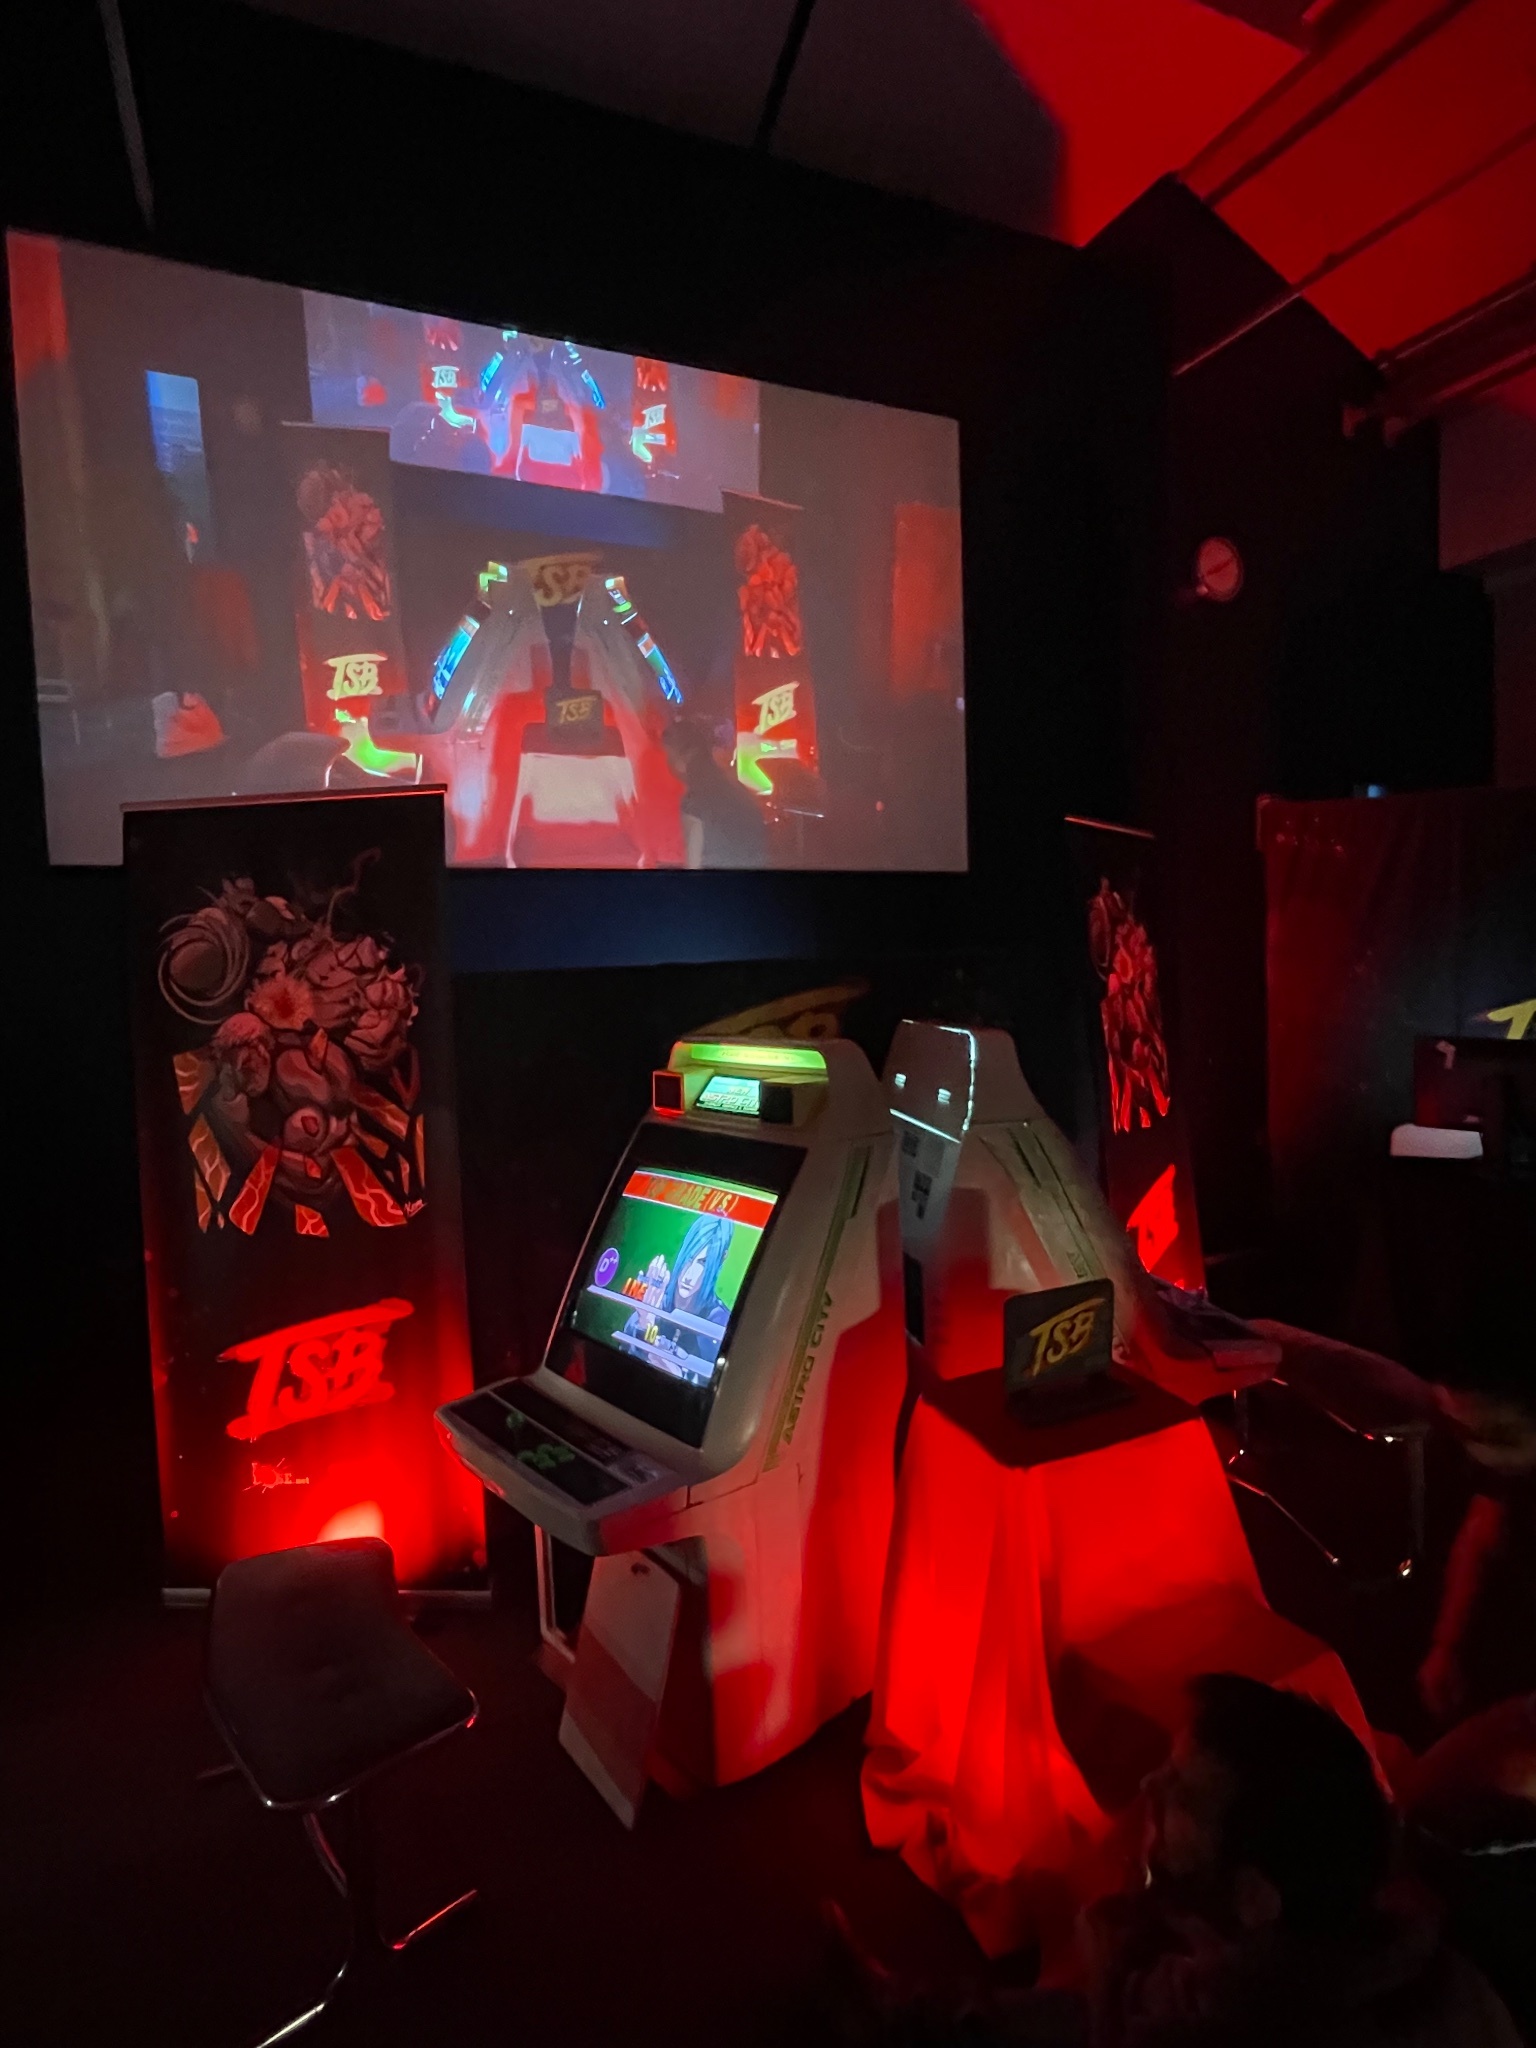 Two arcade cabs under a movie screen. There are decorations and a red light.